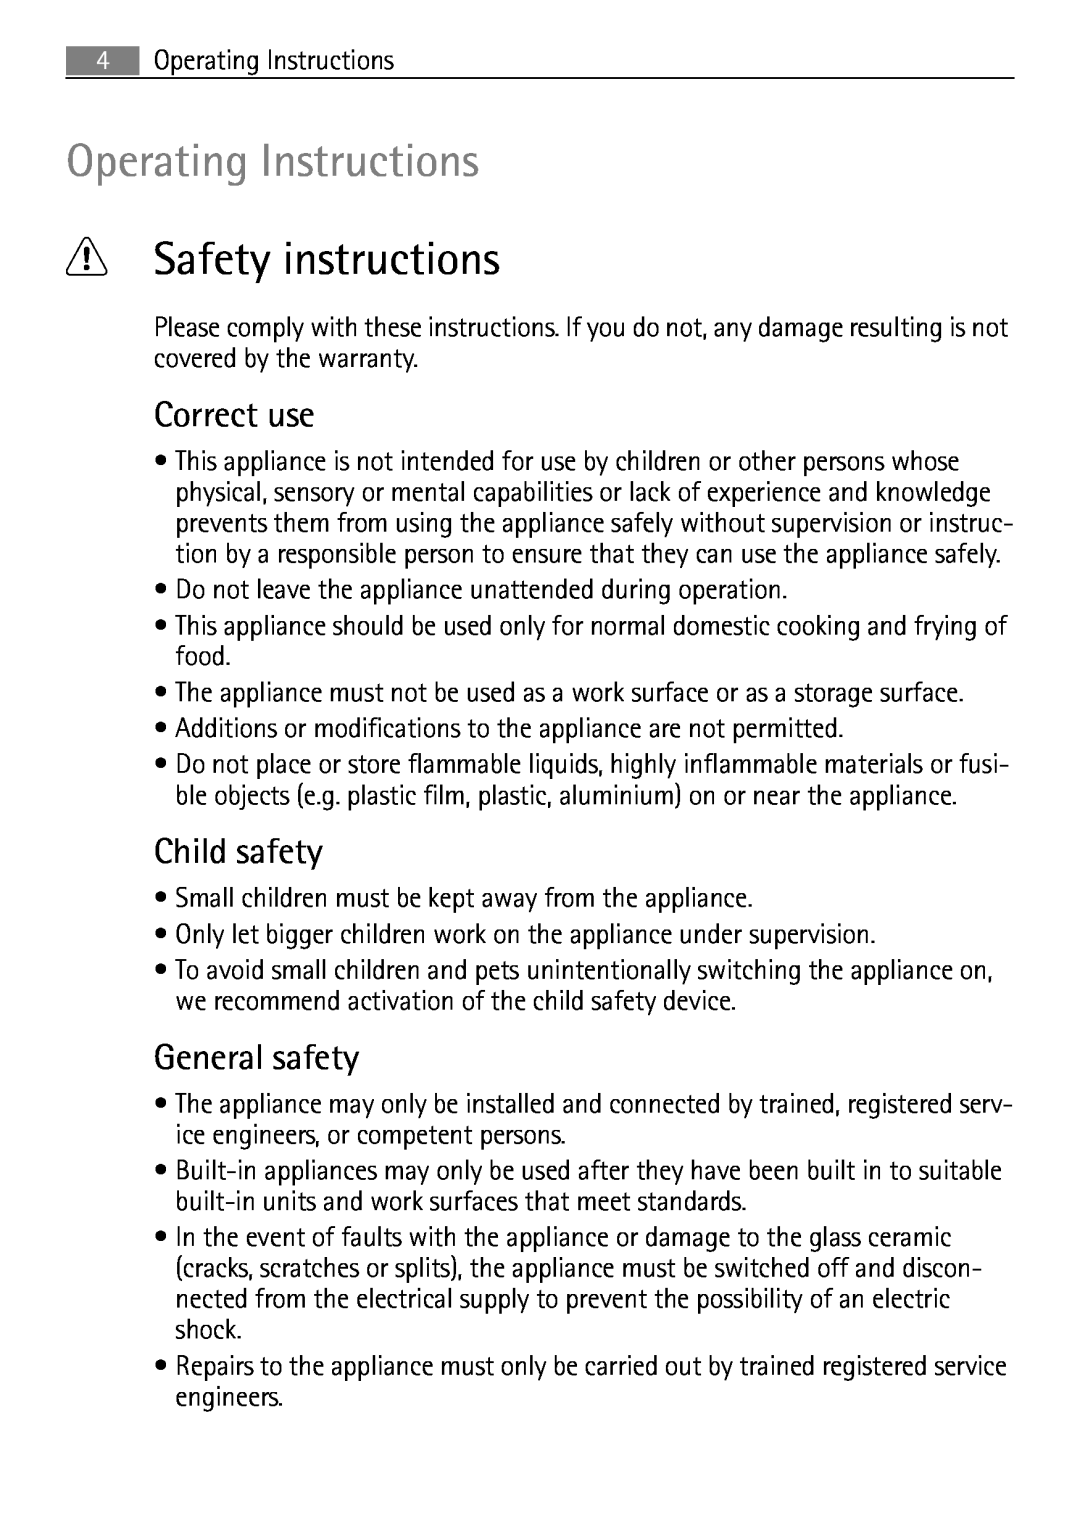 Electrolux 98001 KF SN user manual Operating Instructions, Safety instructions, Correct use, Child safety, General safety 